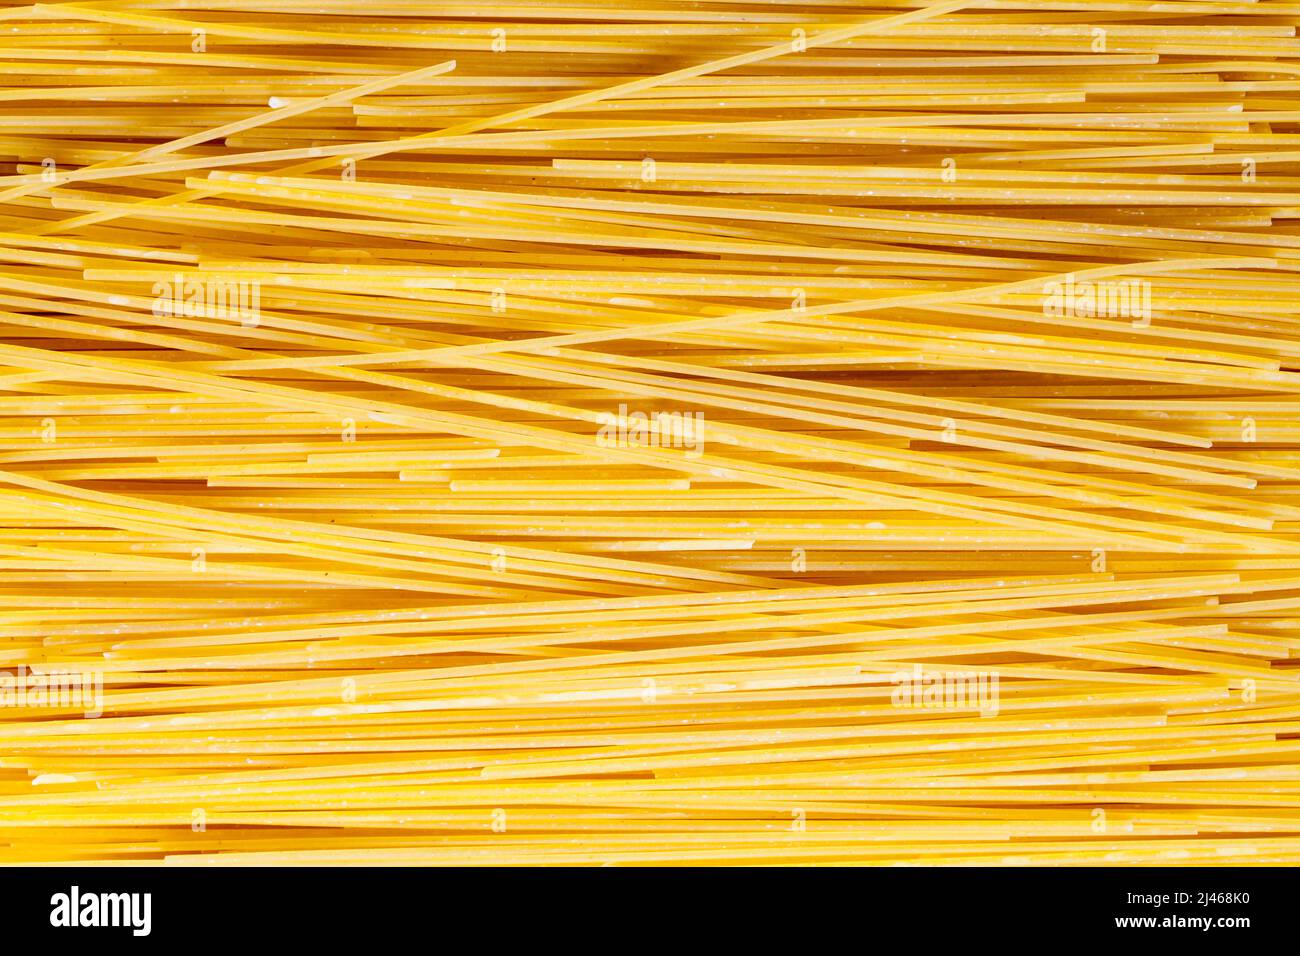 Dry Uncooked Spaghetti Pasta Noodles Background Texture. Stock Photo